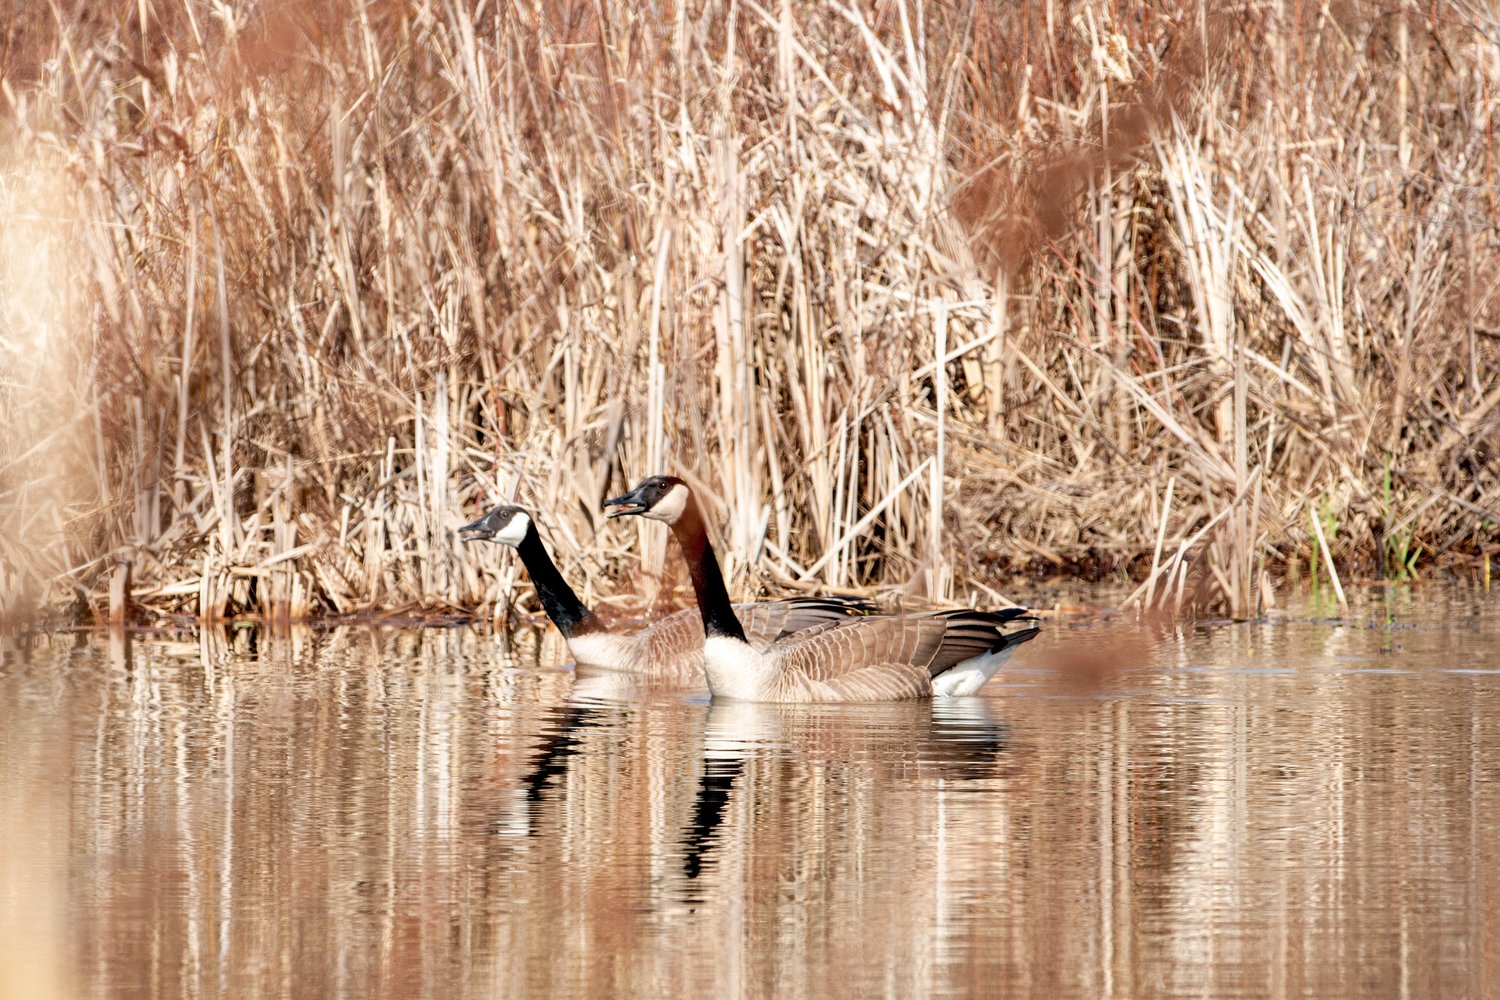 These two Canadian Geese are enjoying the new China Creek floodwater and fish habitat project area.